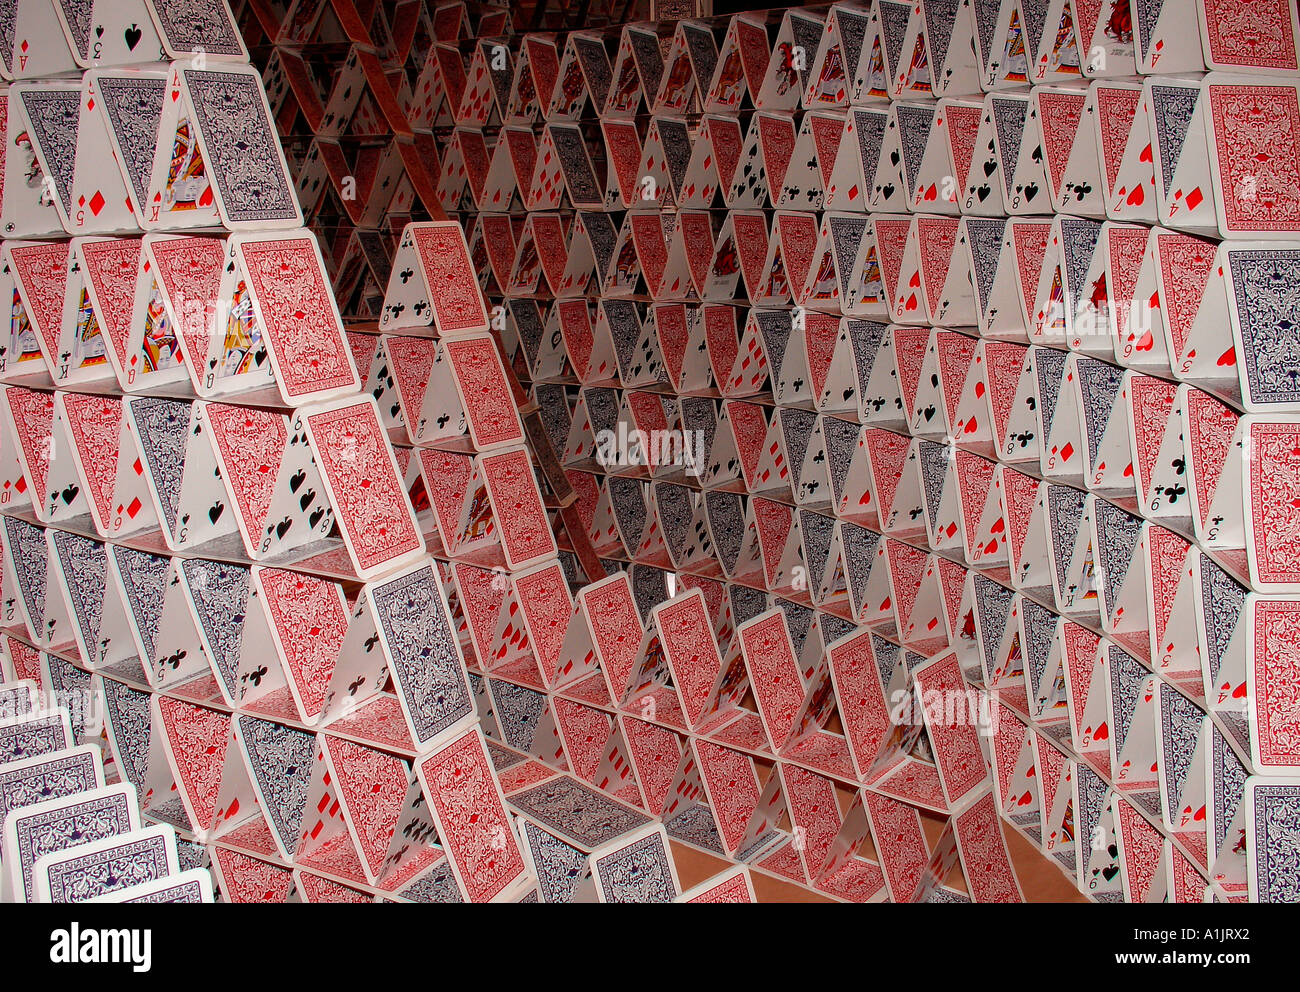 Pyramid of playing cards Stock Photo - Alamy